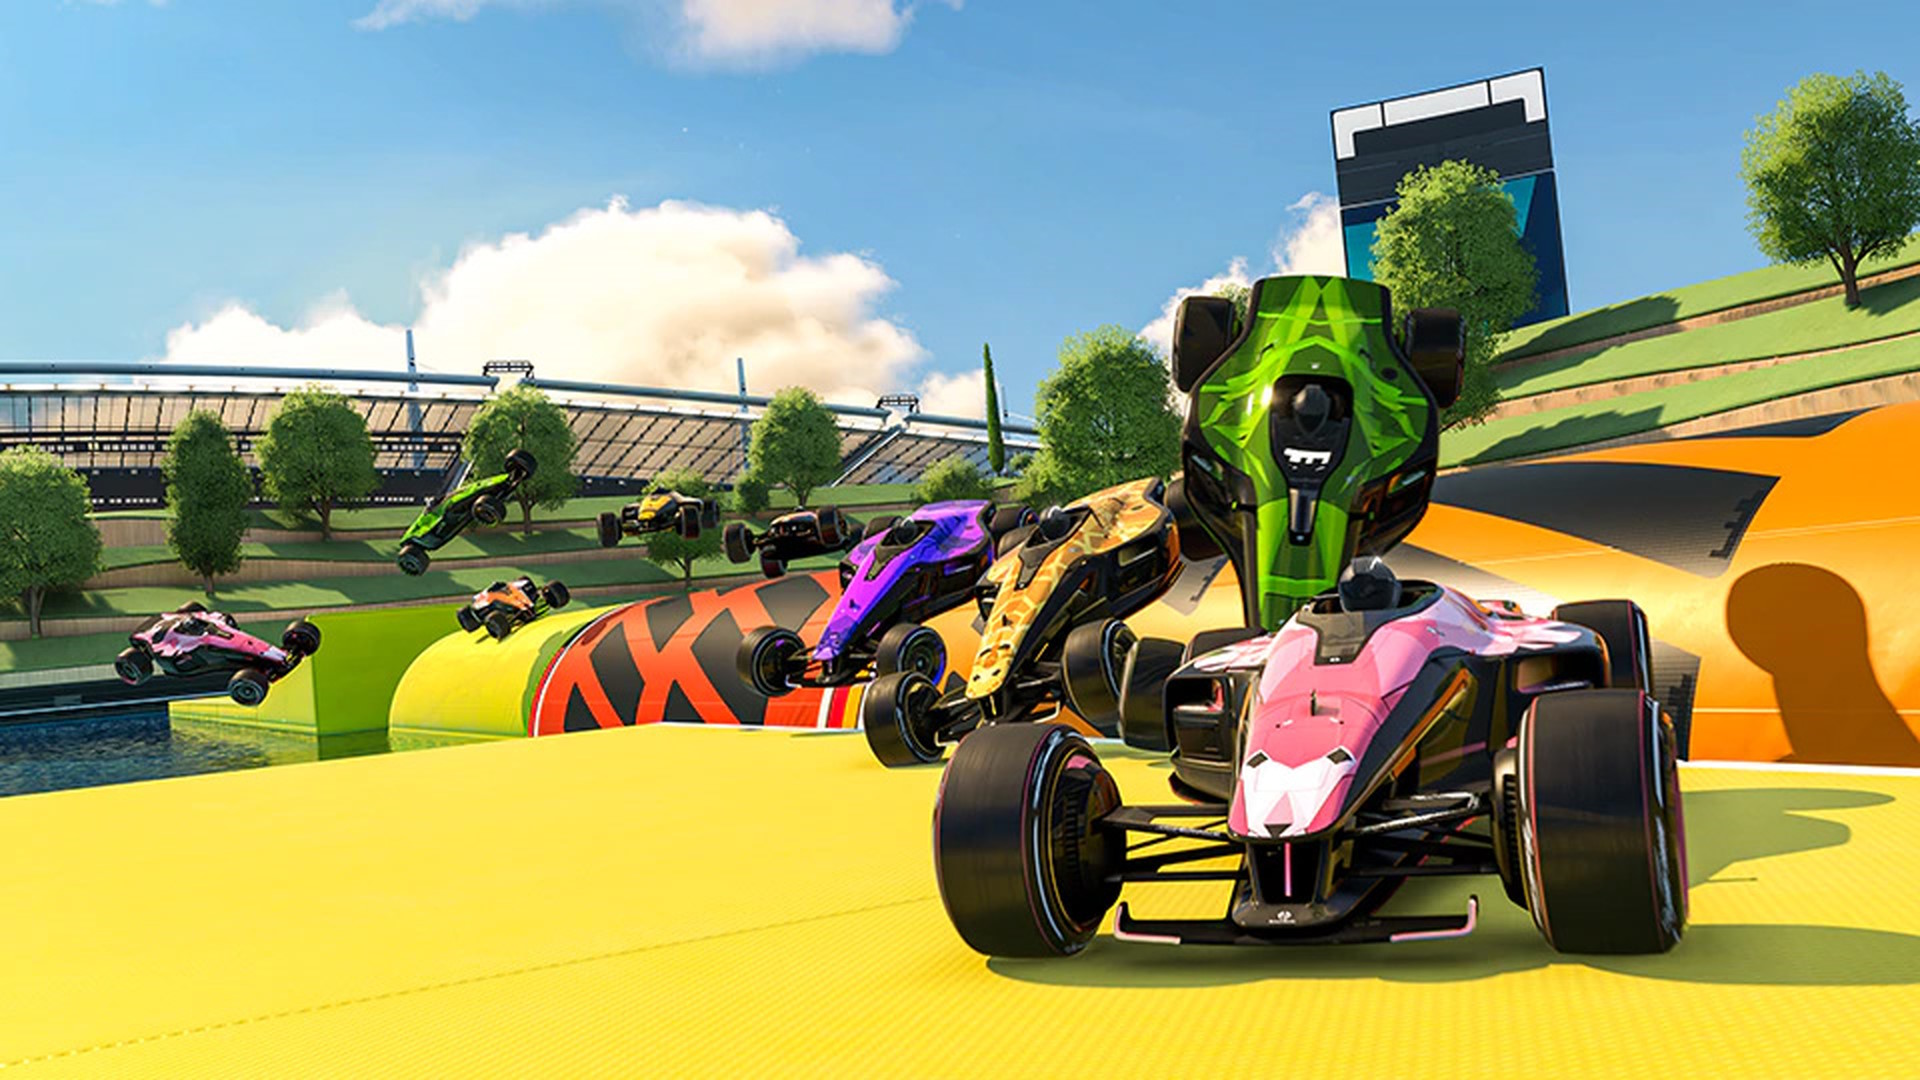  Three years after its original release, the latest Trackmania is finally coming to Steam 